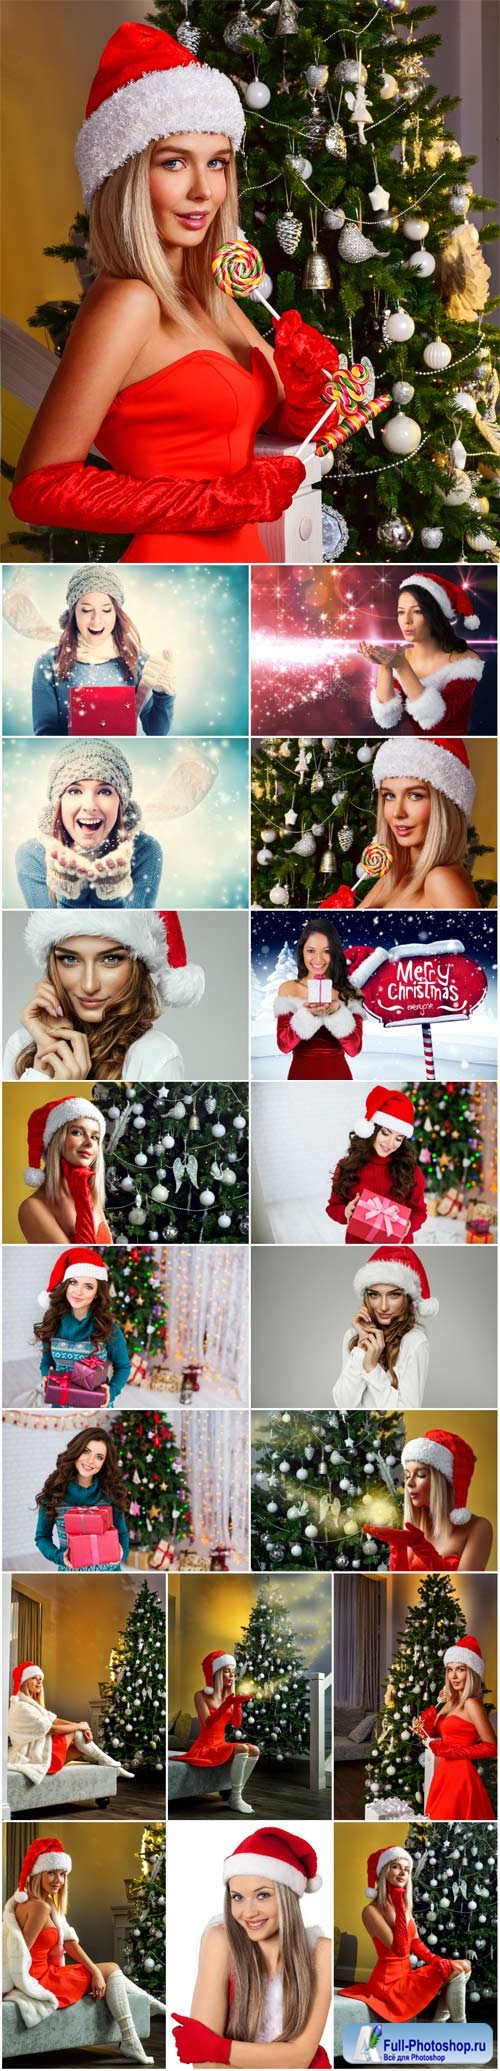 New Year and Christmas stock photos 61